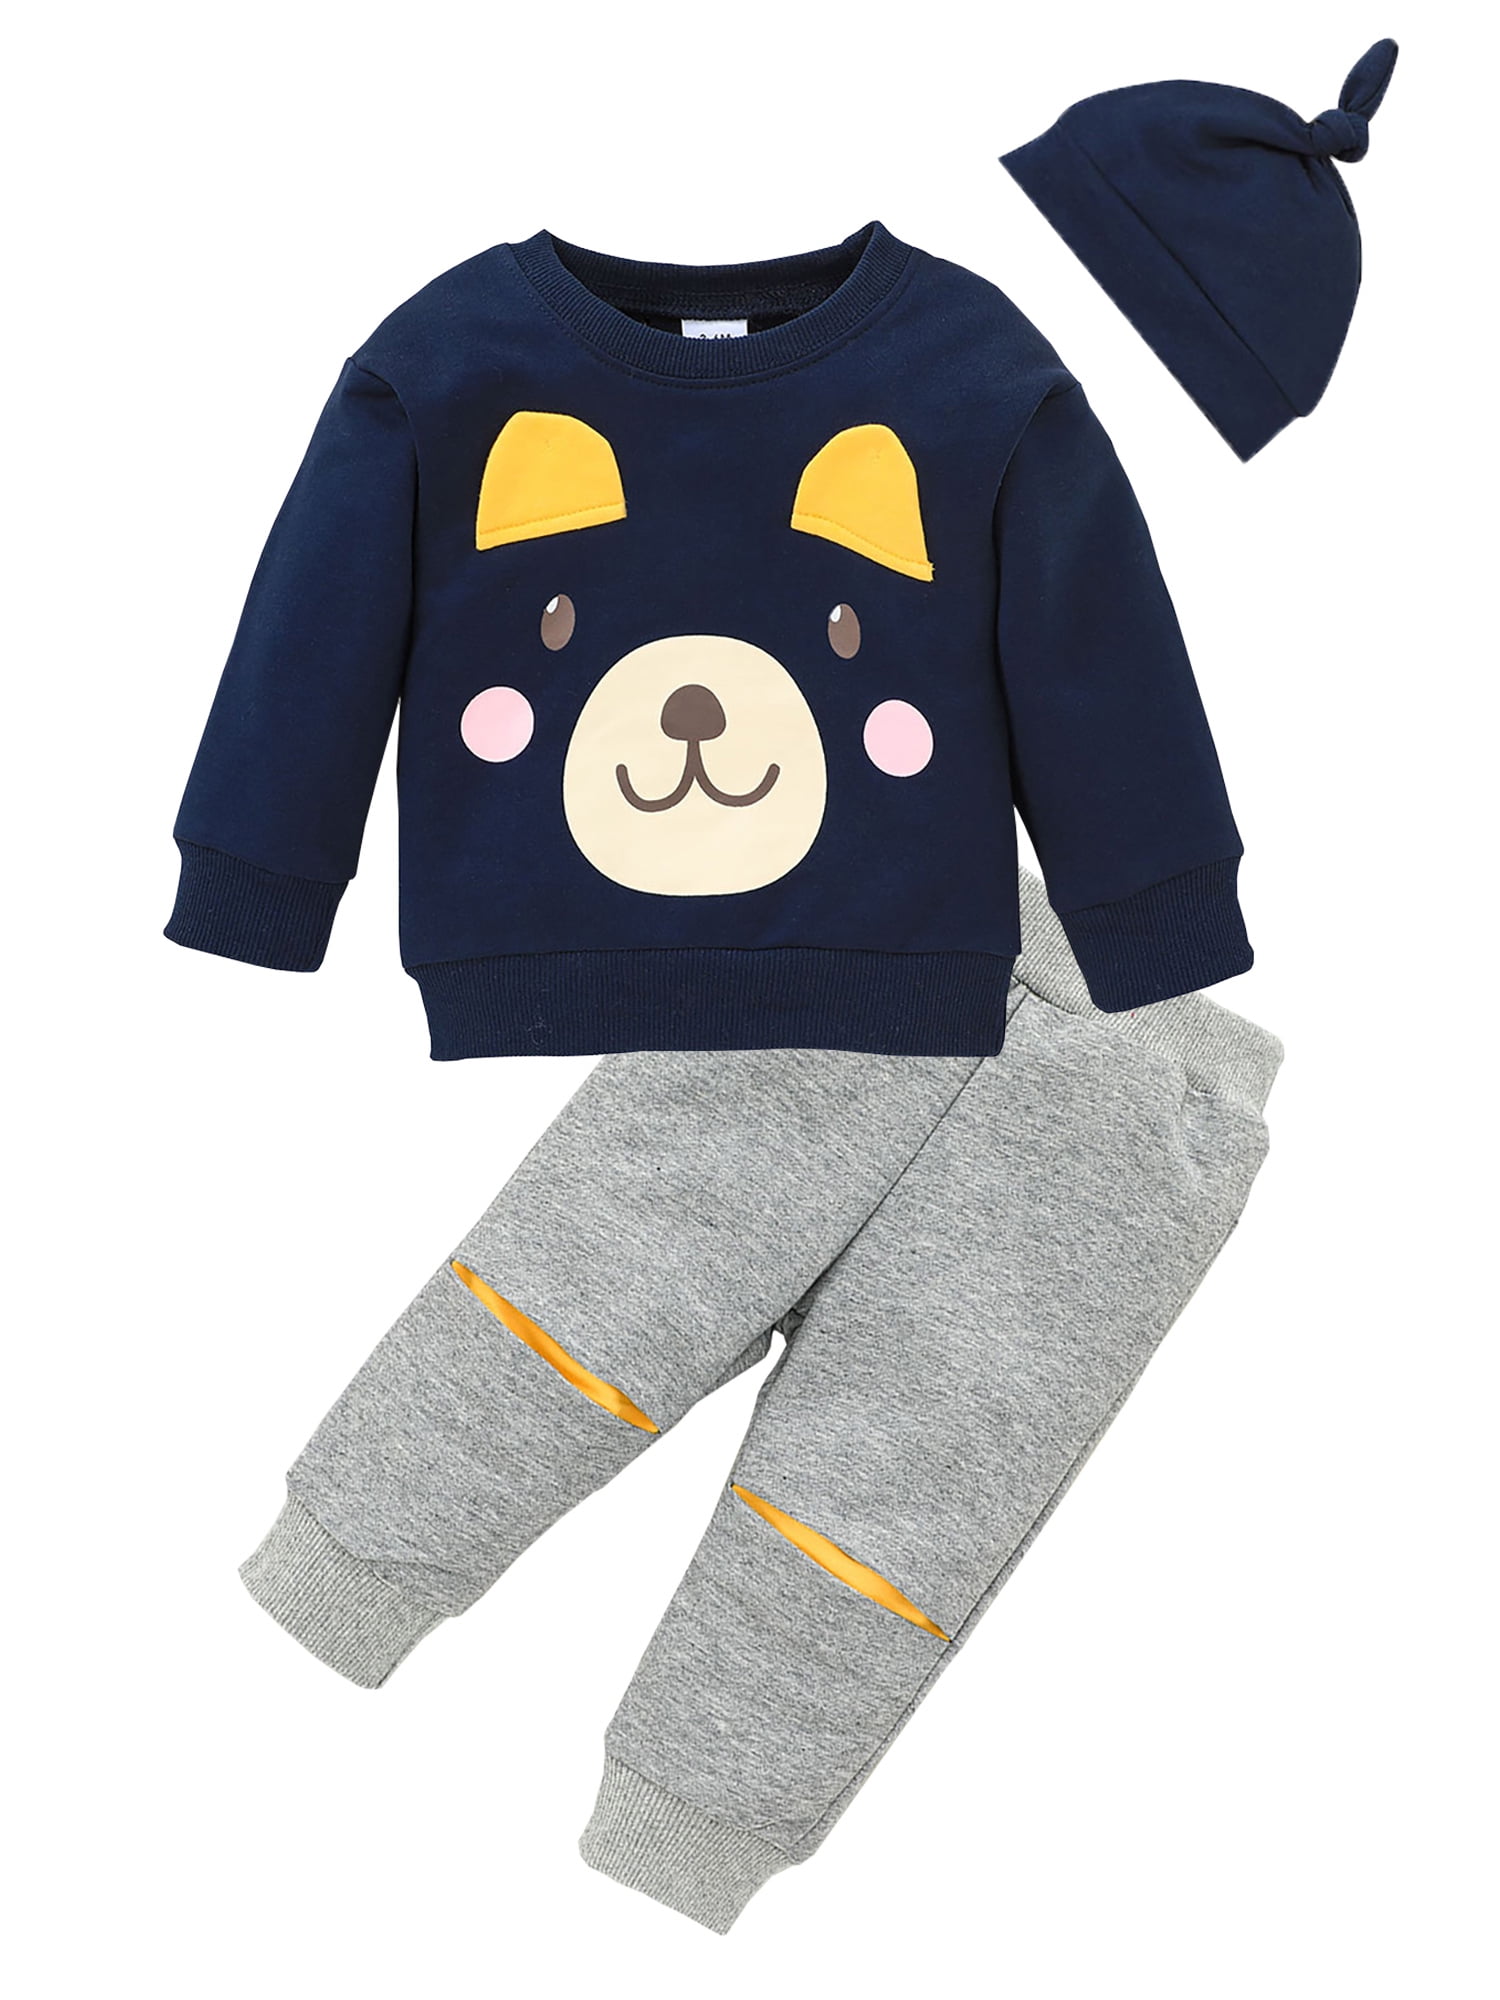 Buy Mavilla Garments Unisex Baby Boy's Baby Girl's Teddy Bear Denim  Dungaree Set With T-shirt For 0-6 6-12 Months Baby || Baby Boy Dresses ||  Clothes For New Born Baby. (6-9 Months,